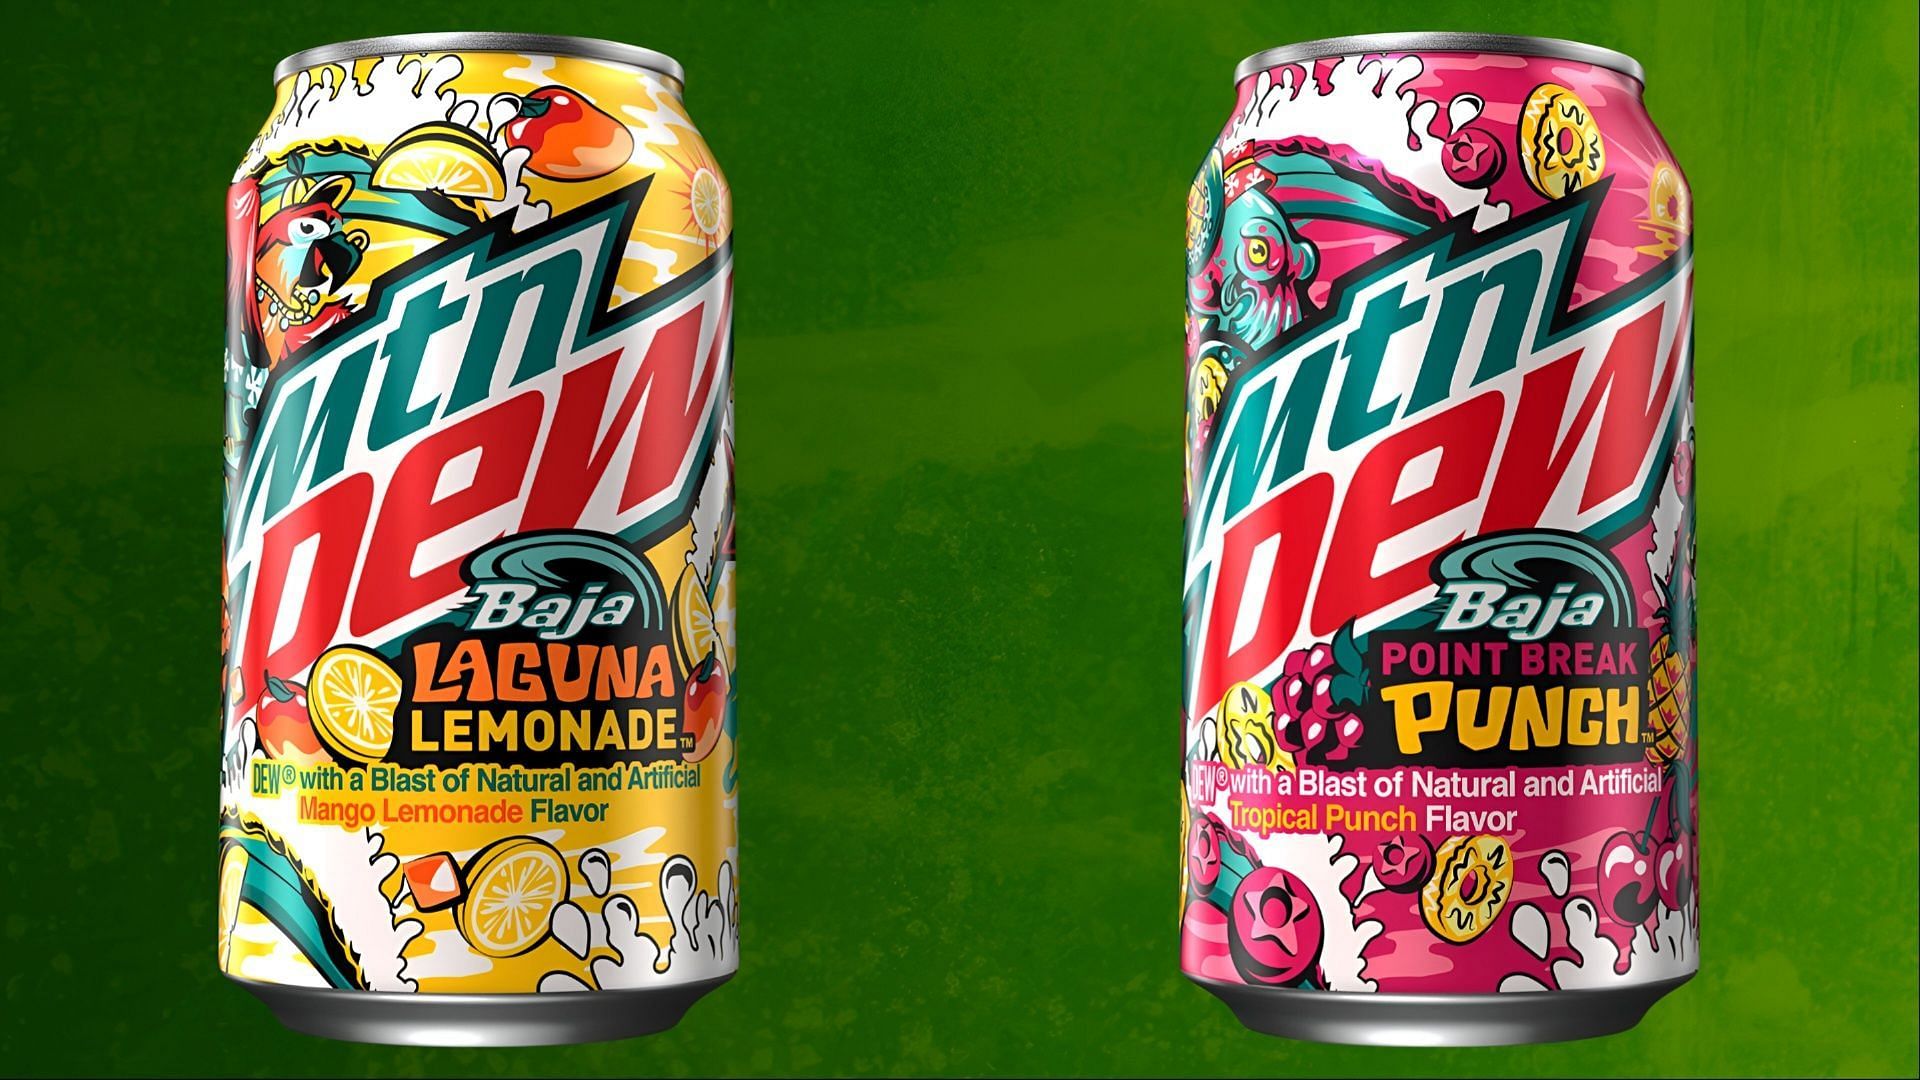 The Laguna Lemonade and Point Break Punch were launched this Monday, March 19 (Image via Mountain Dew)